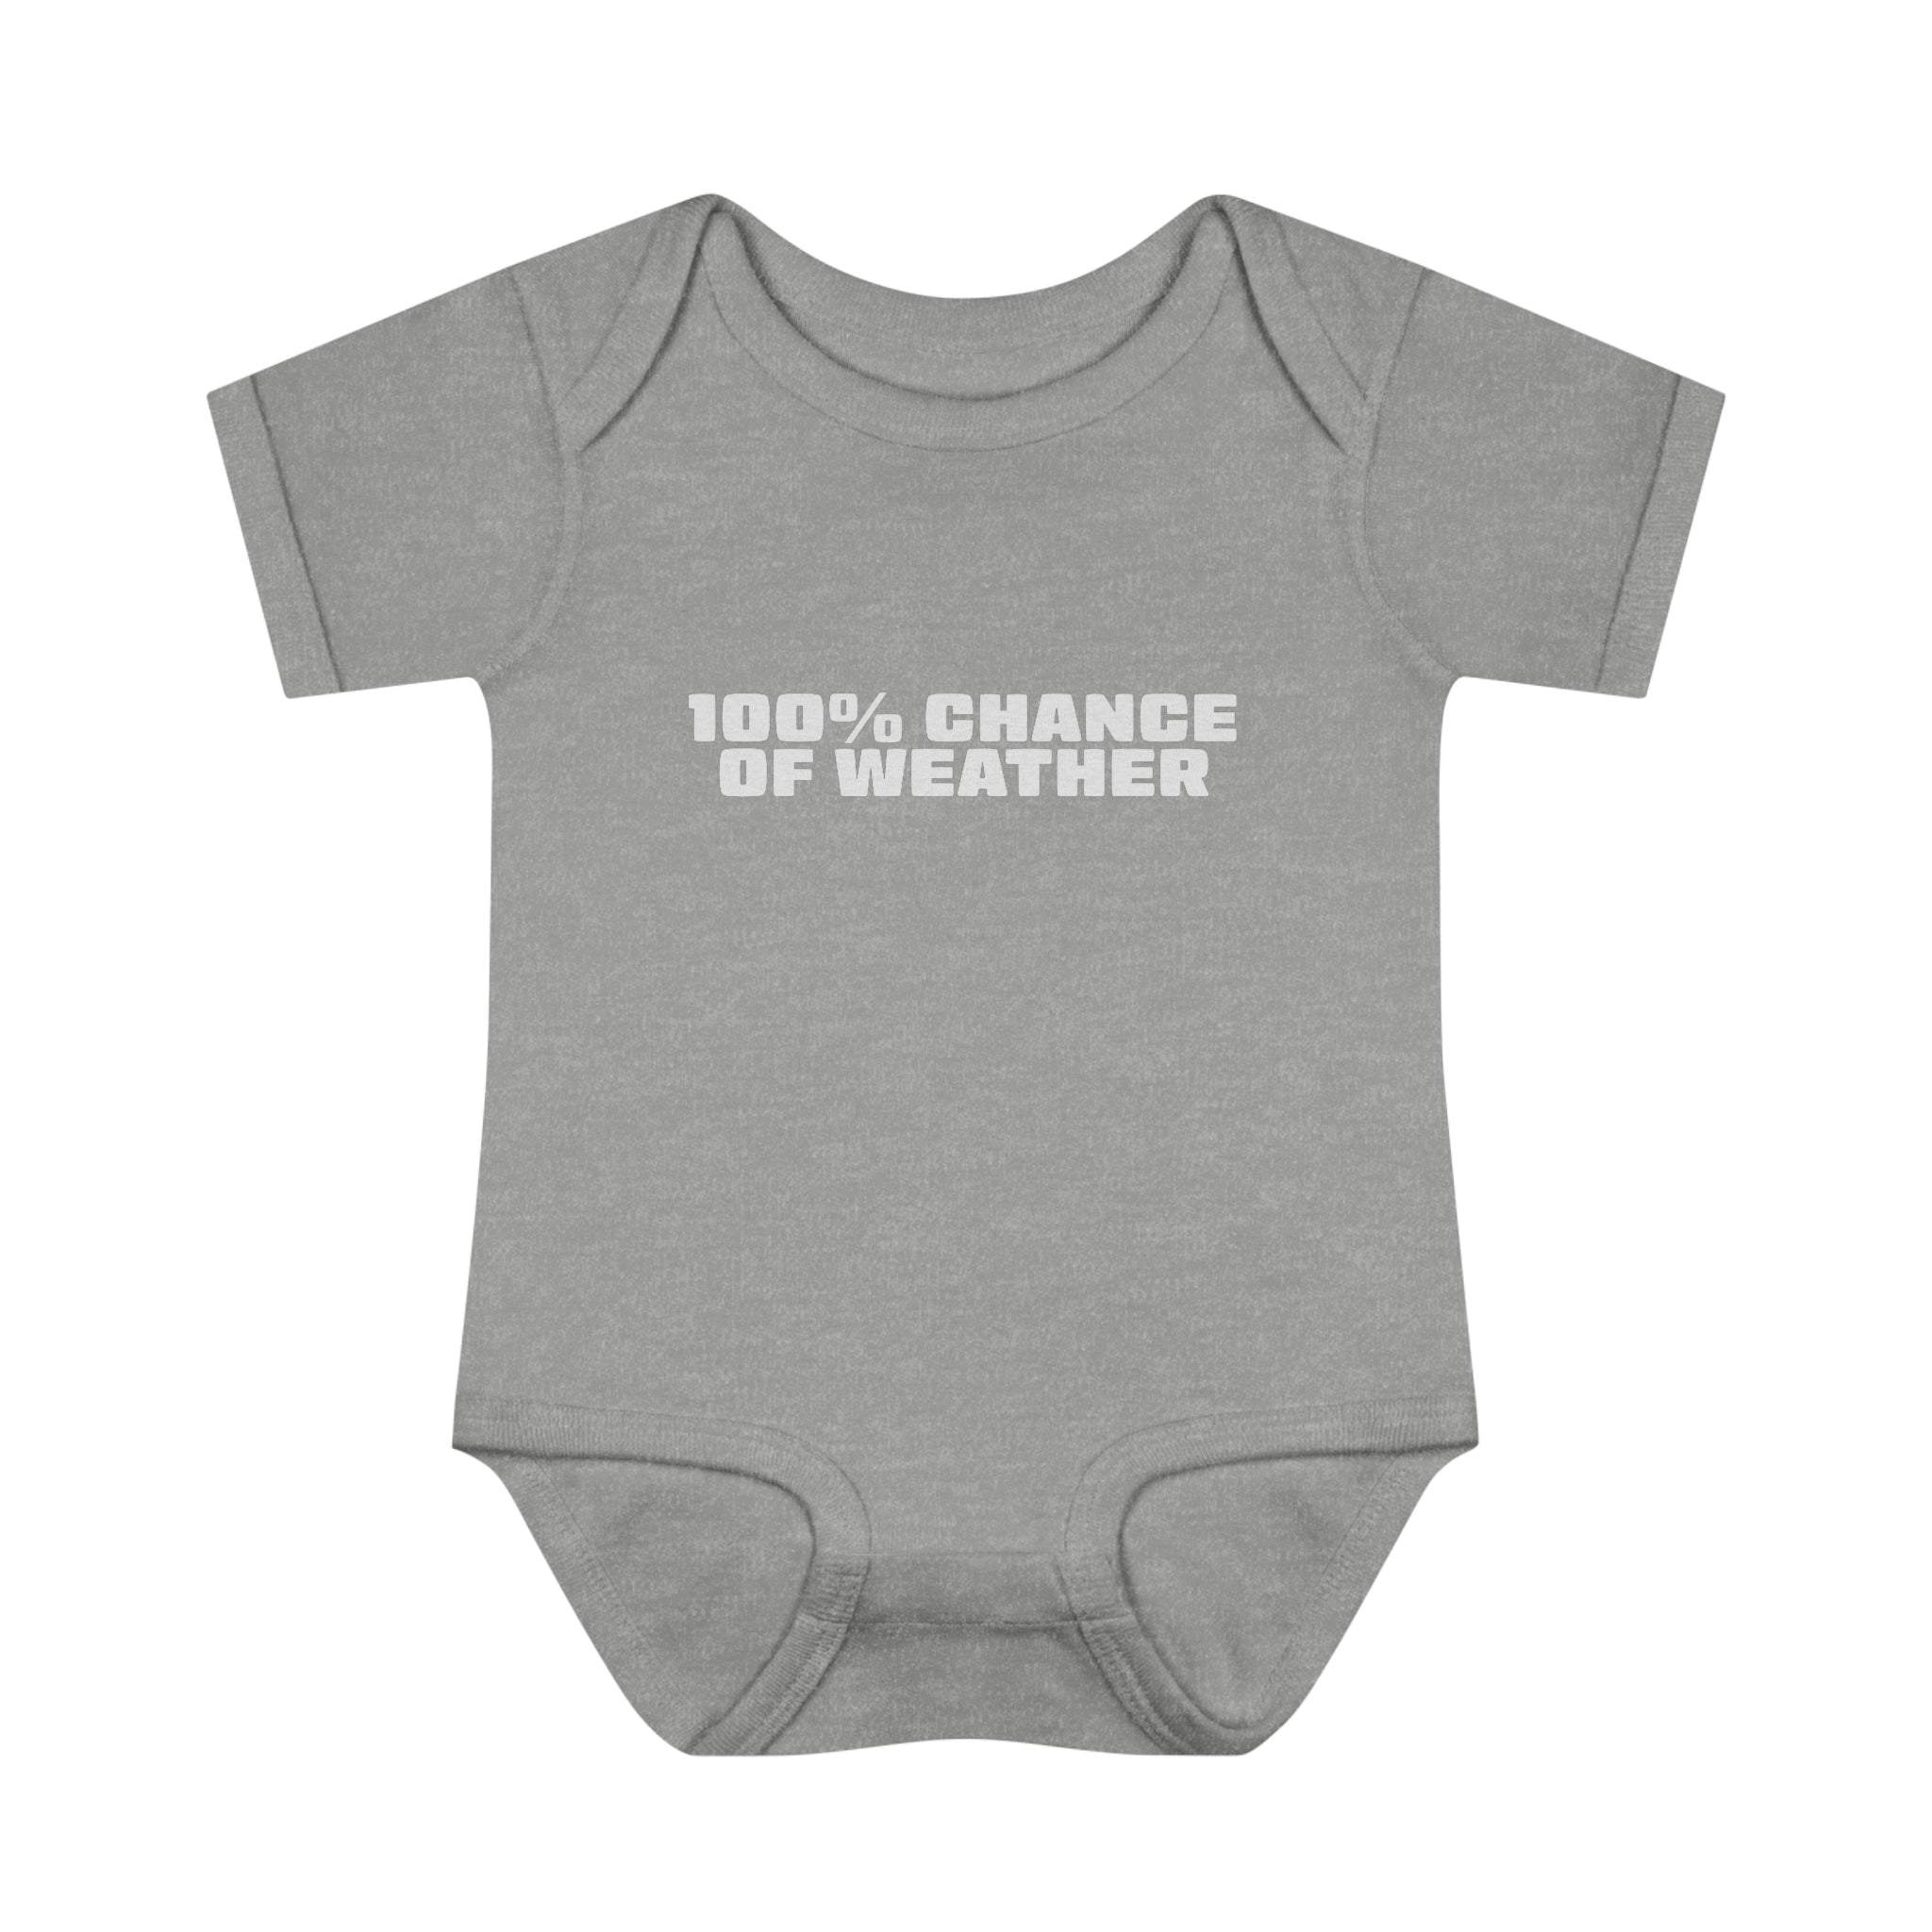 100% Chance of Weather Infant Bodysuit 